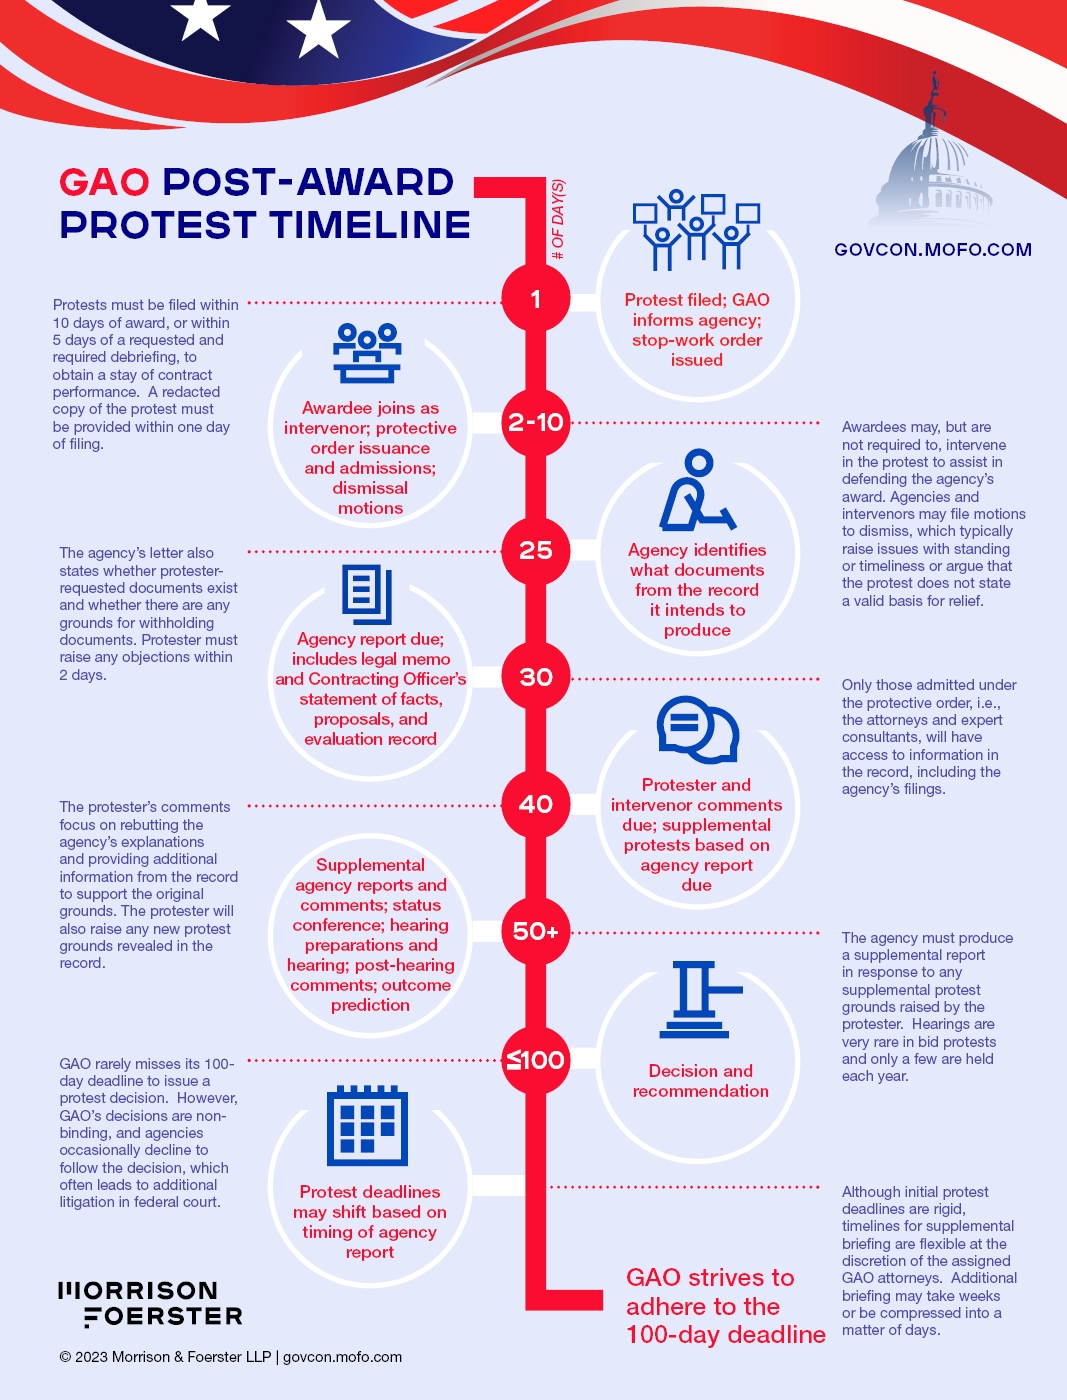 GAO Post-Award Protest Timeline Infographic